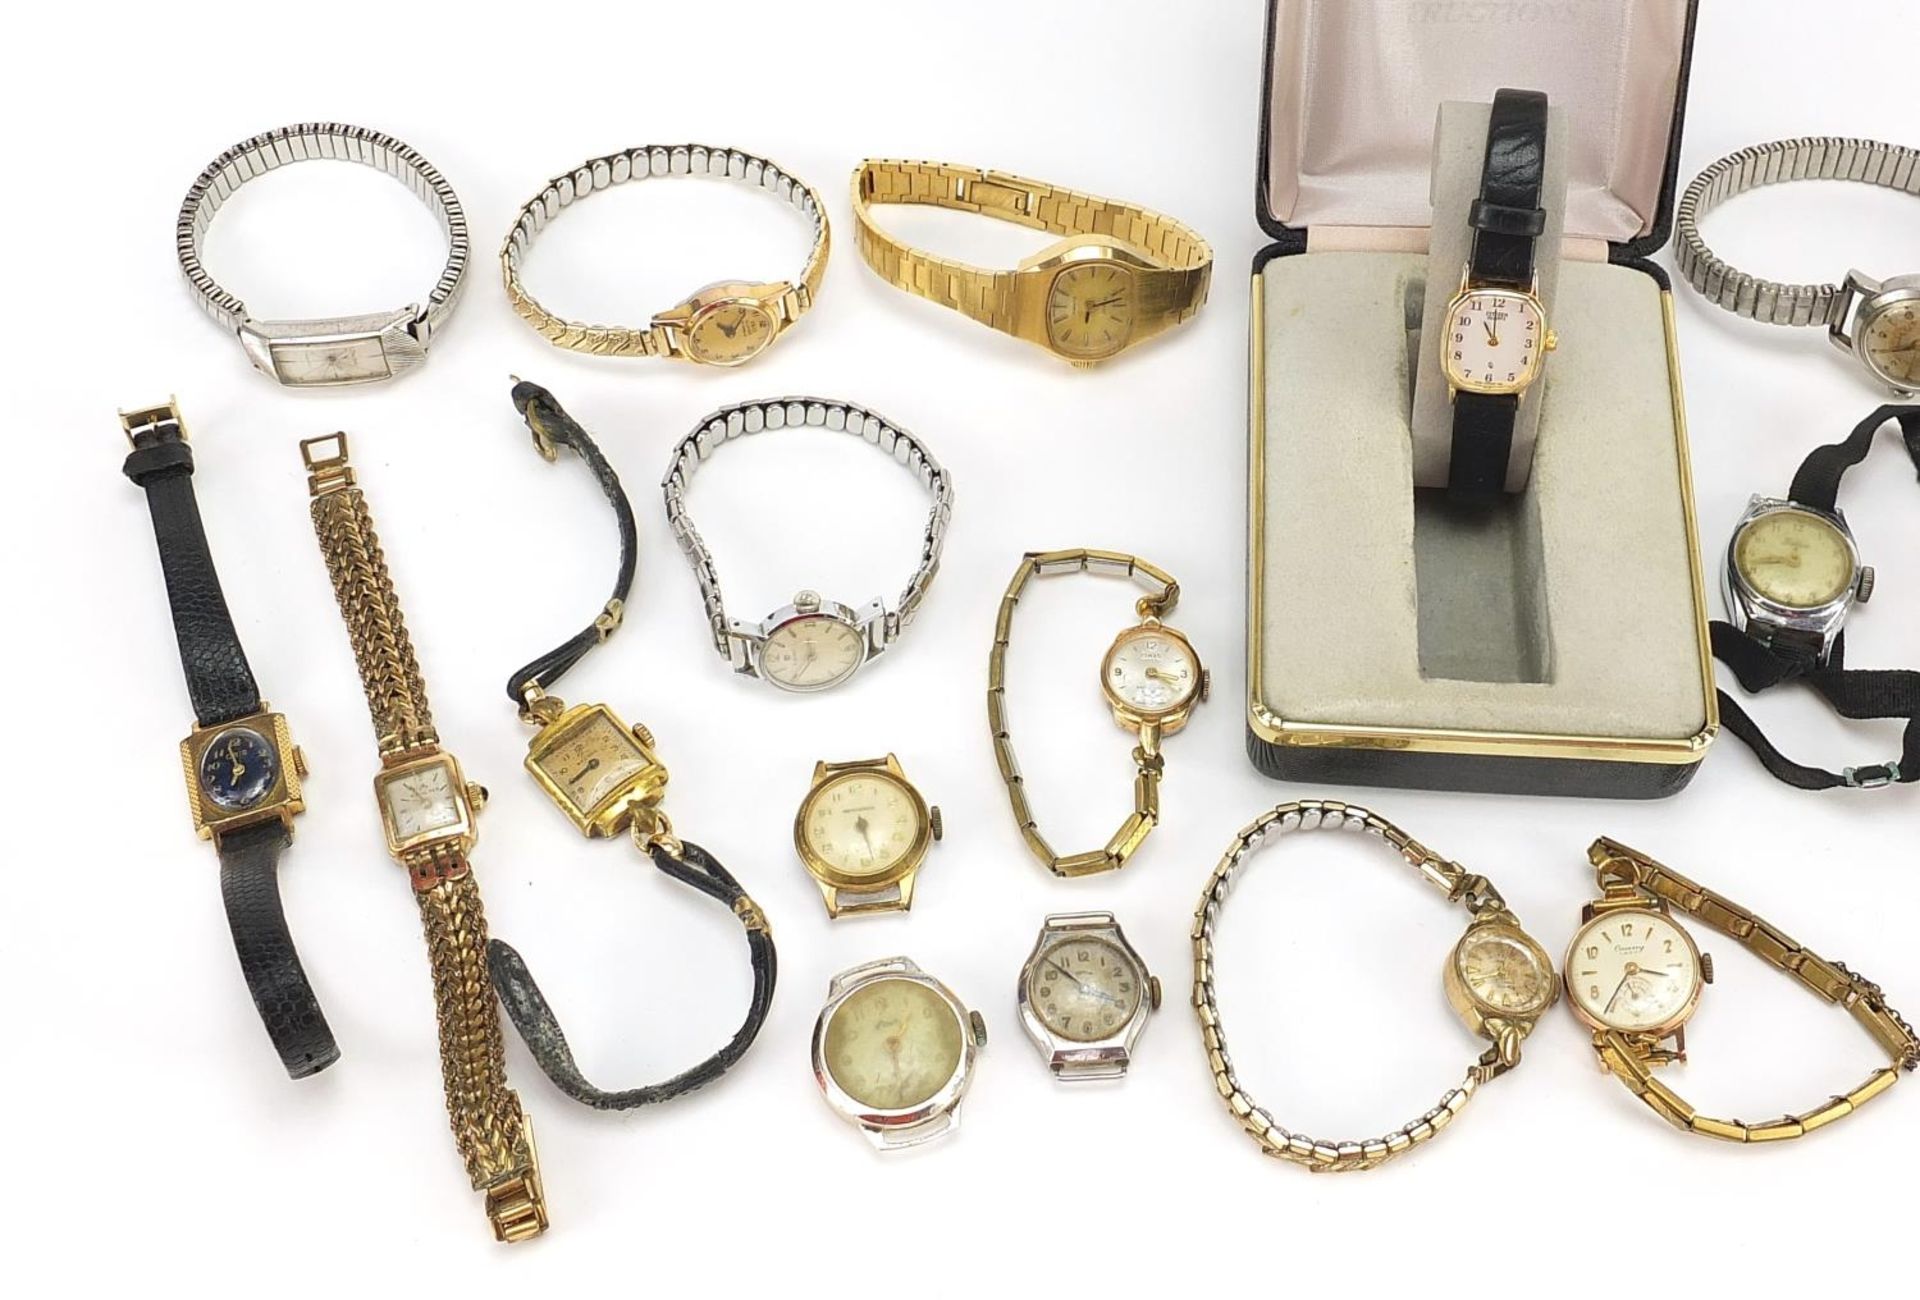 Collection of ladies vintage wristwatches including Oris, Citizen and Seiko High-Beat - Image 2 of 3